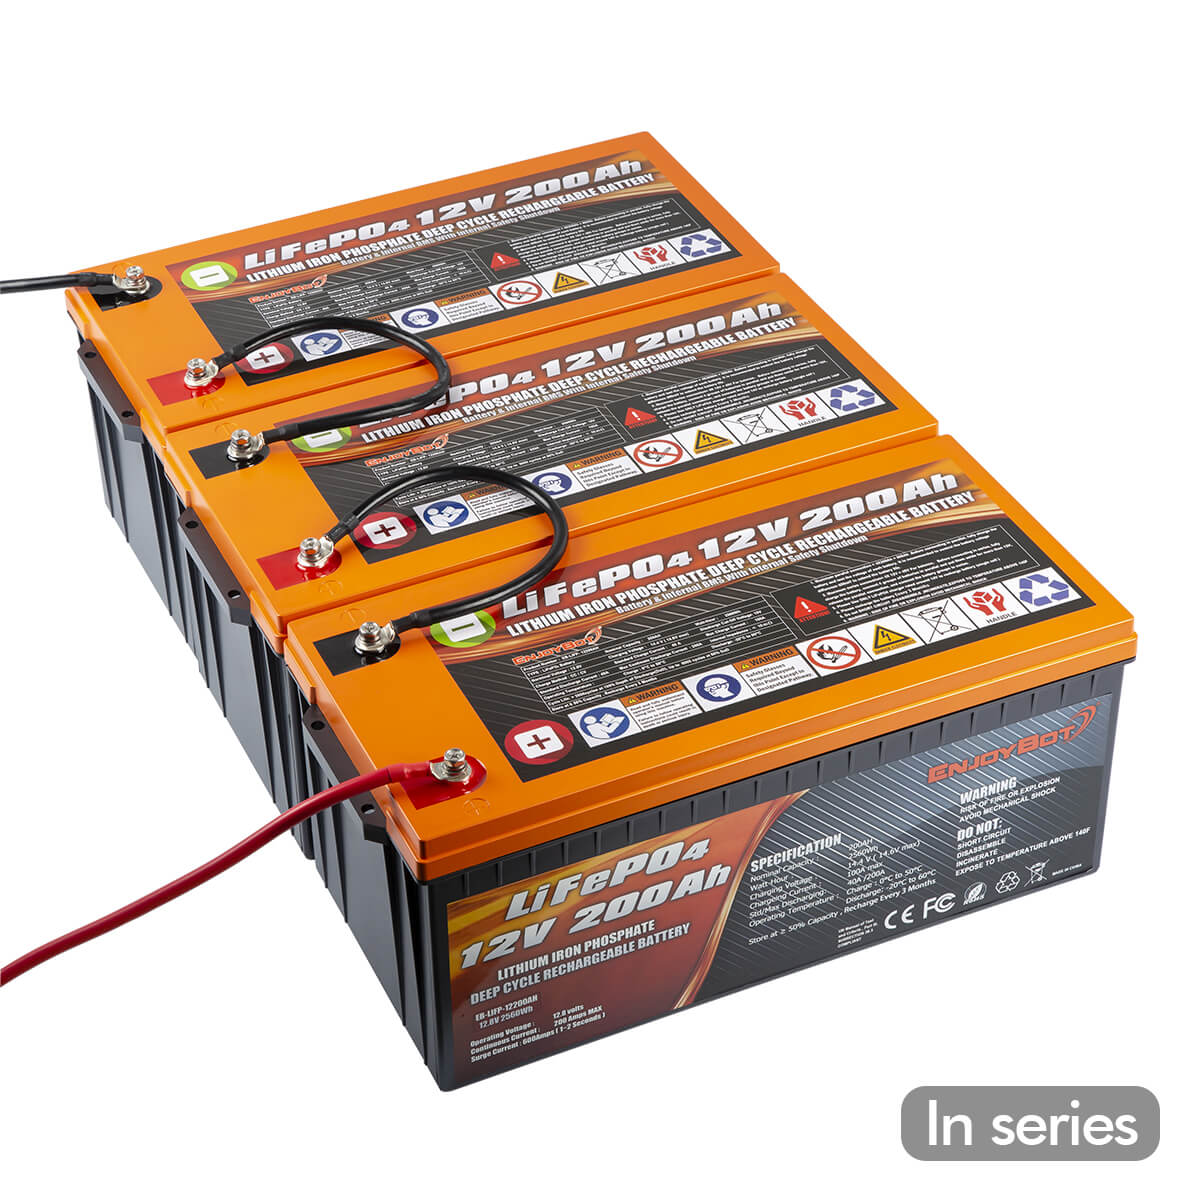 Enjoybot Lithium Battery 36v 200ah for Marine Trolling Motor Deep Cycle High & Low Temp Protection Battery 7680 Wh - 3 batteries